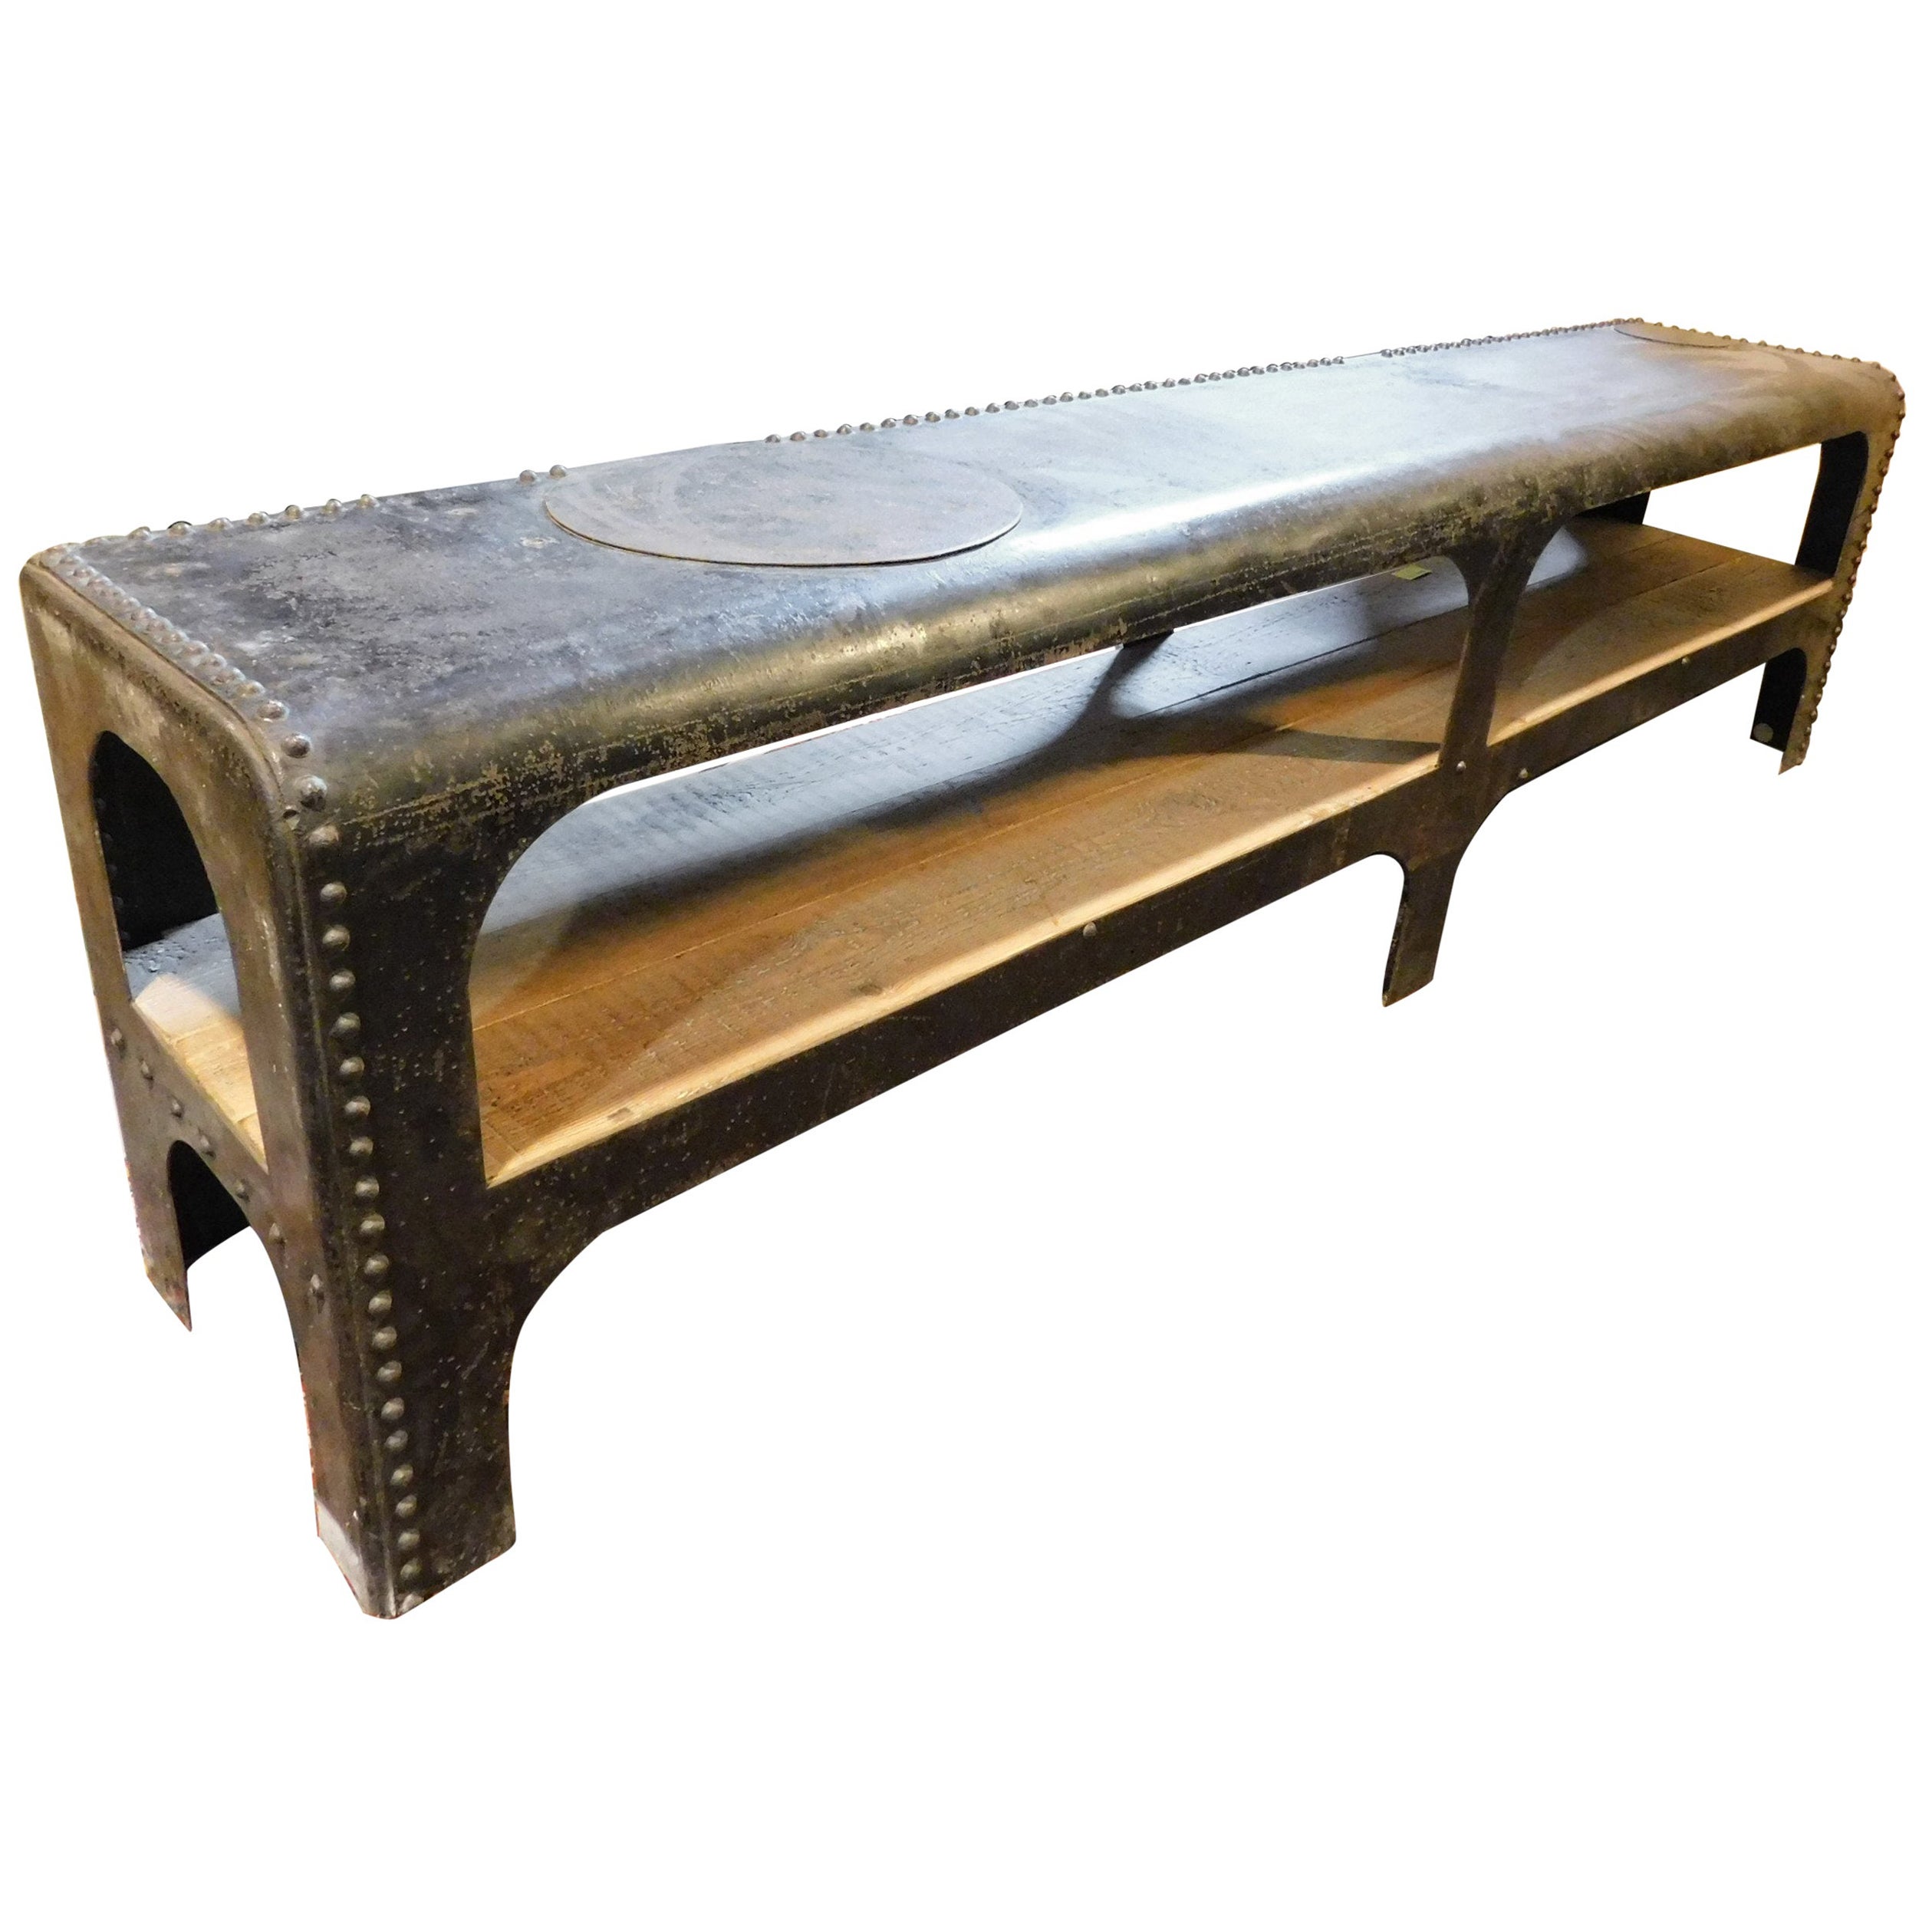 Vintage Industrial Bench in Iron and Wood, TV Stand, 20th Century Italy